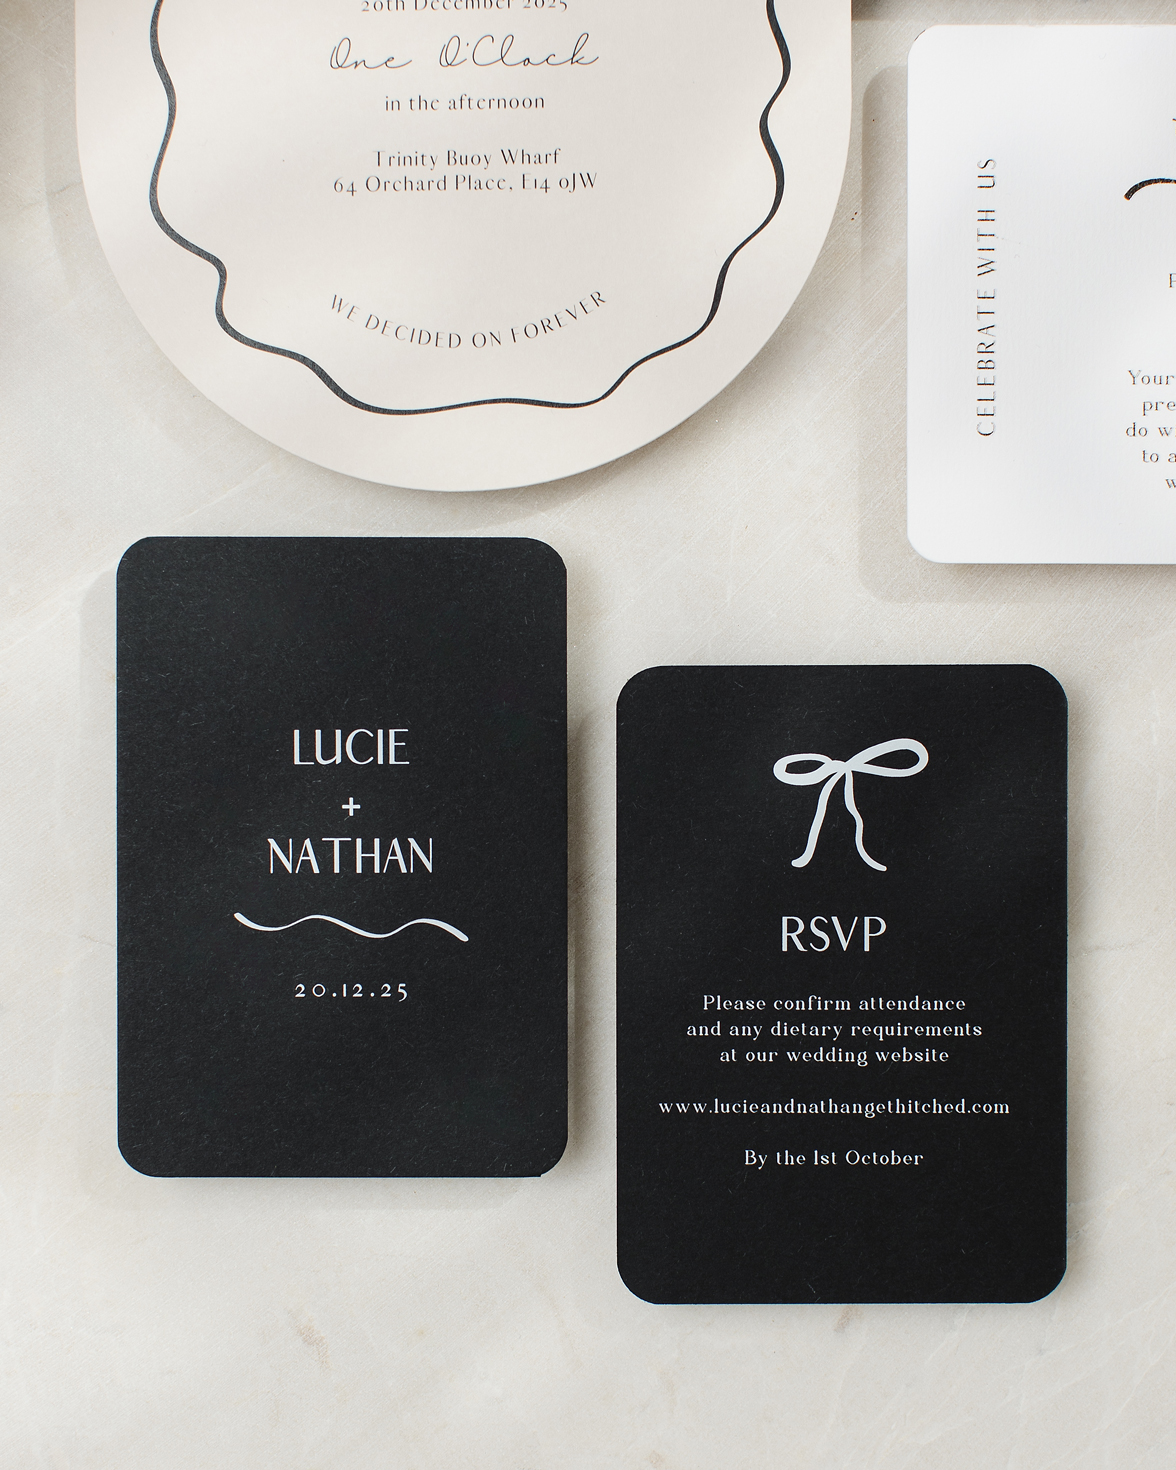 Black and white wedding RSVP card with rounded corners and hand drawn bow